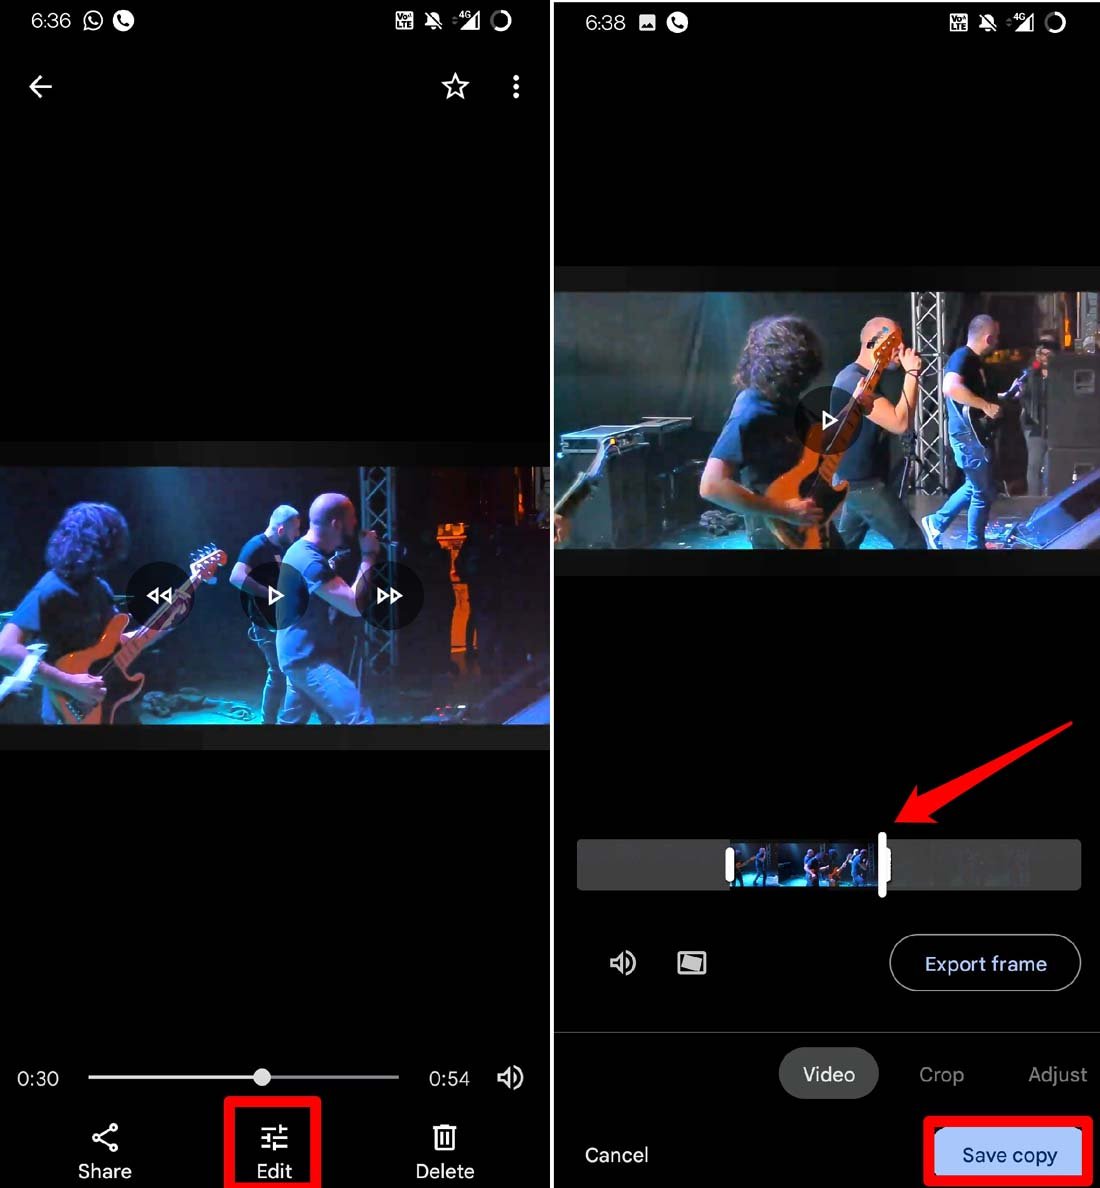 How to trim a video on Google Photos